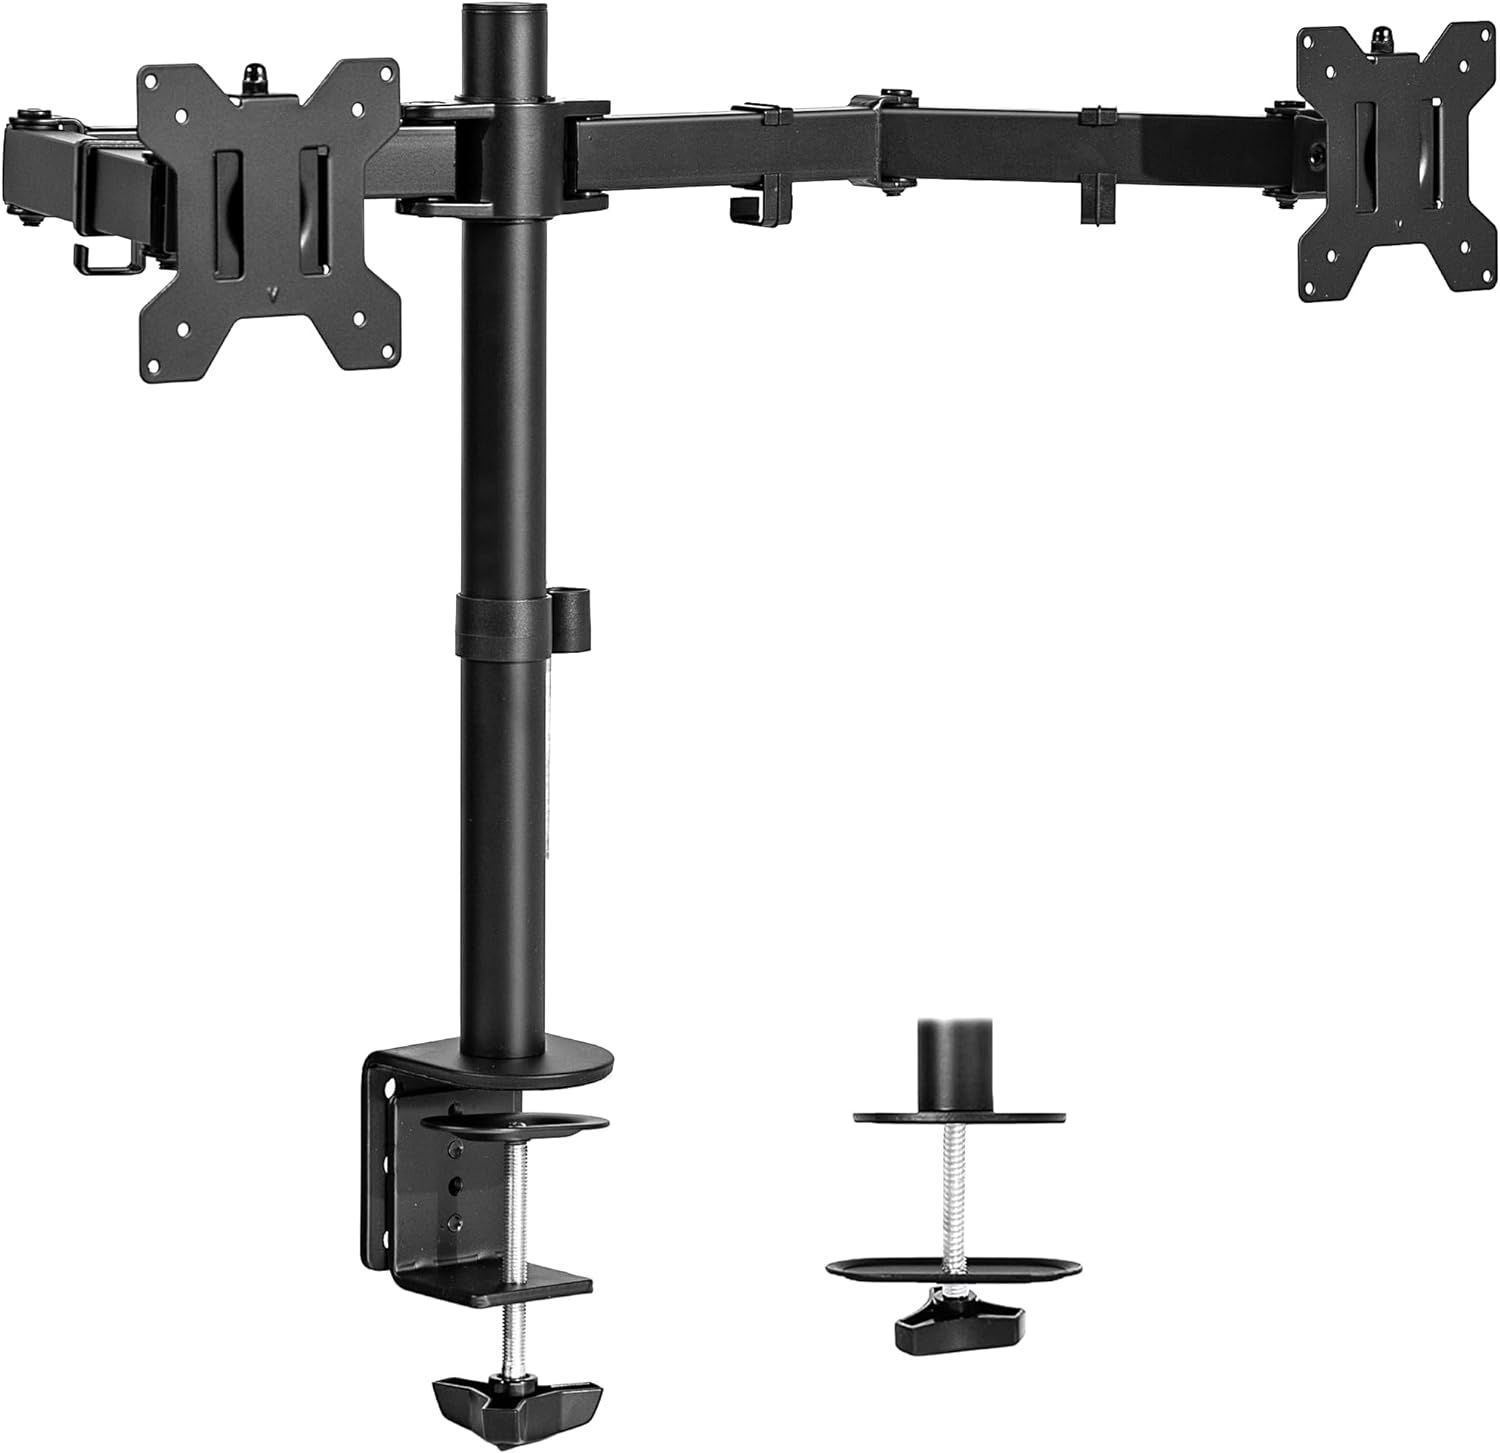 I recently purchased the VIVO Dual Monitor Desk Mount (STAND-V002) and have been thoroughly impressed with its performance and functionality. This heavy-duty, fully adjustable steel stand is designed to hold two computer screens up to 30 inches each, with a maximum weight capacity of 22lbs per screen. Here' a breakdown of my experience:Easy Setup:The setup process for the VIVO Dual Monitor Desk Mount was remarkably easy. The package includes all the necessary hardware and clear, easy-to-follow 